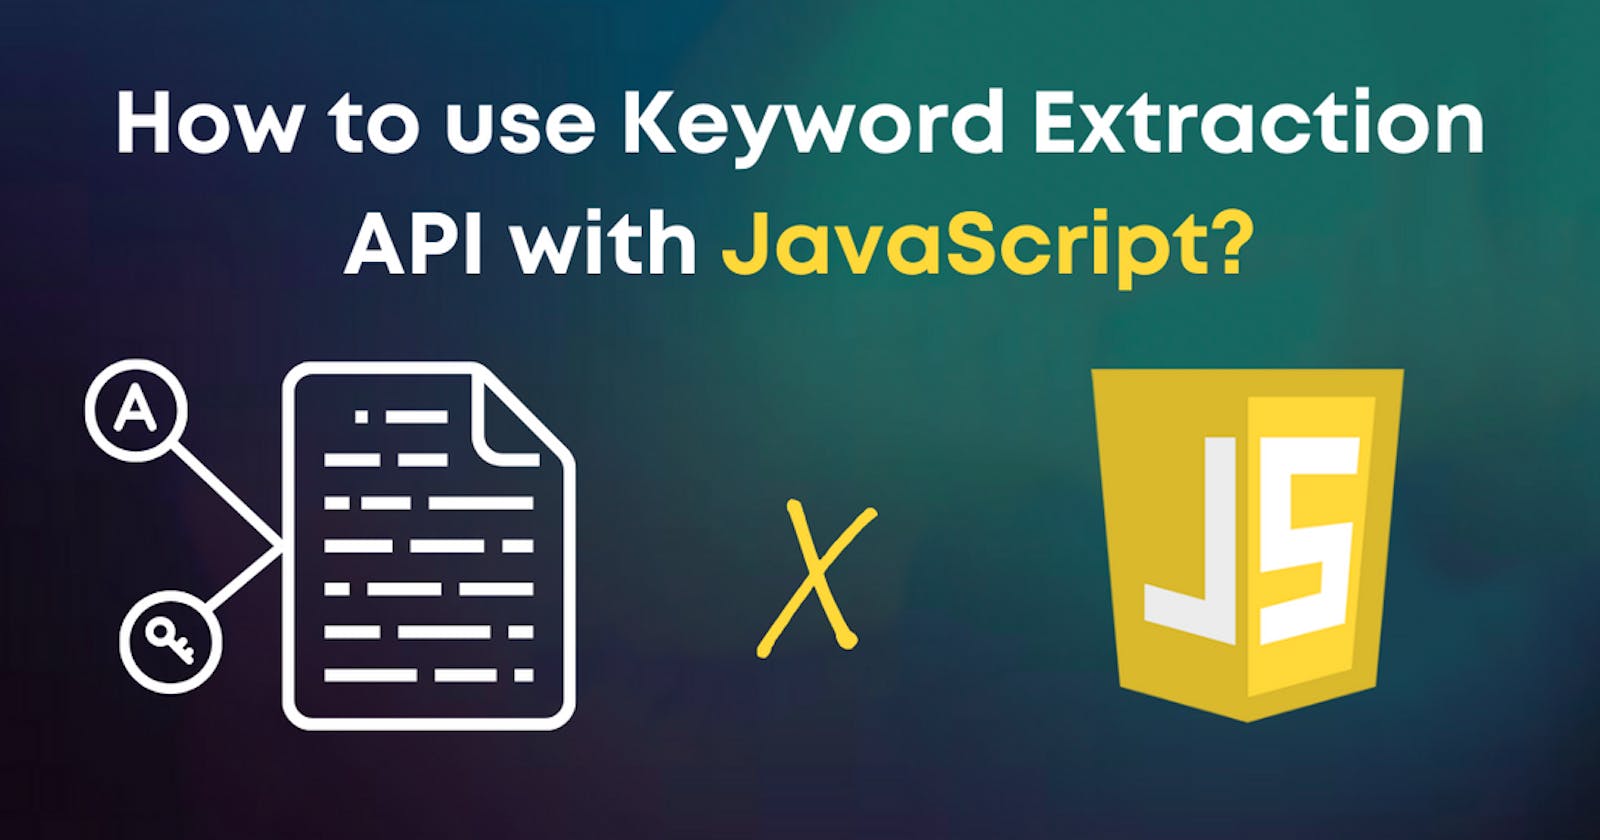 How to use Keyword Extraction API with JavaScript in 5 minutes?